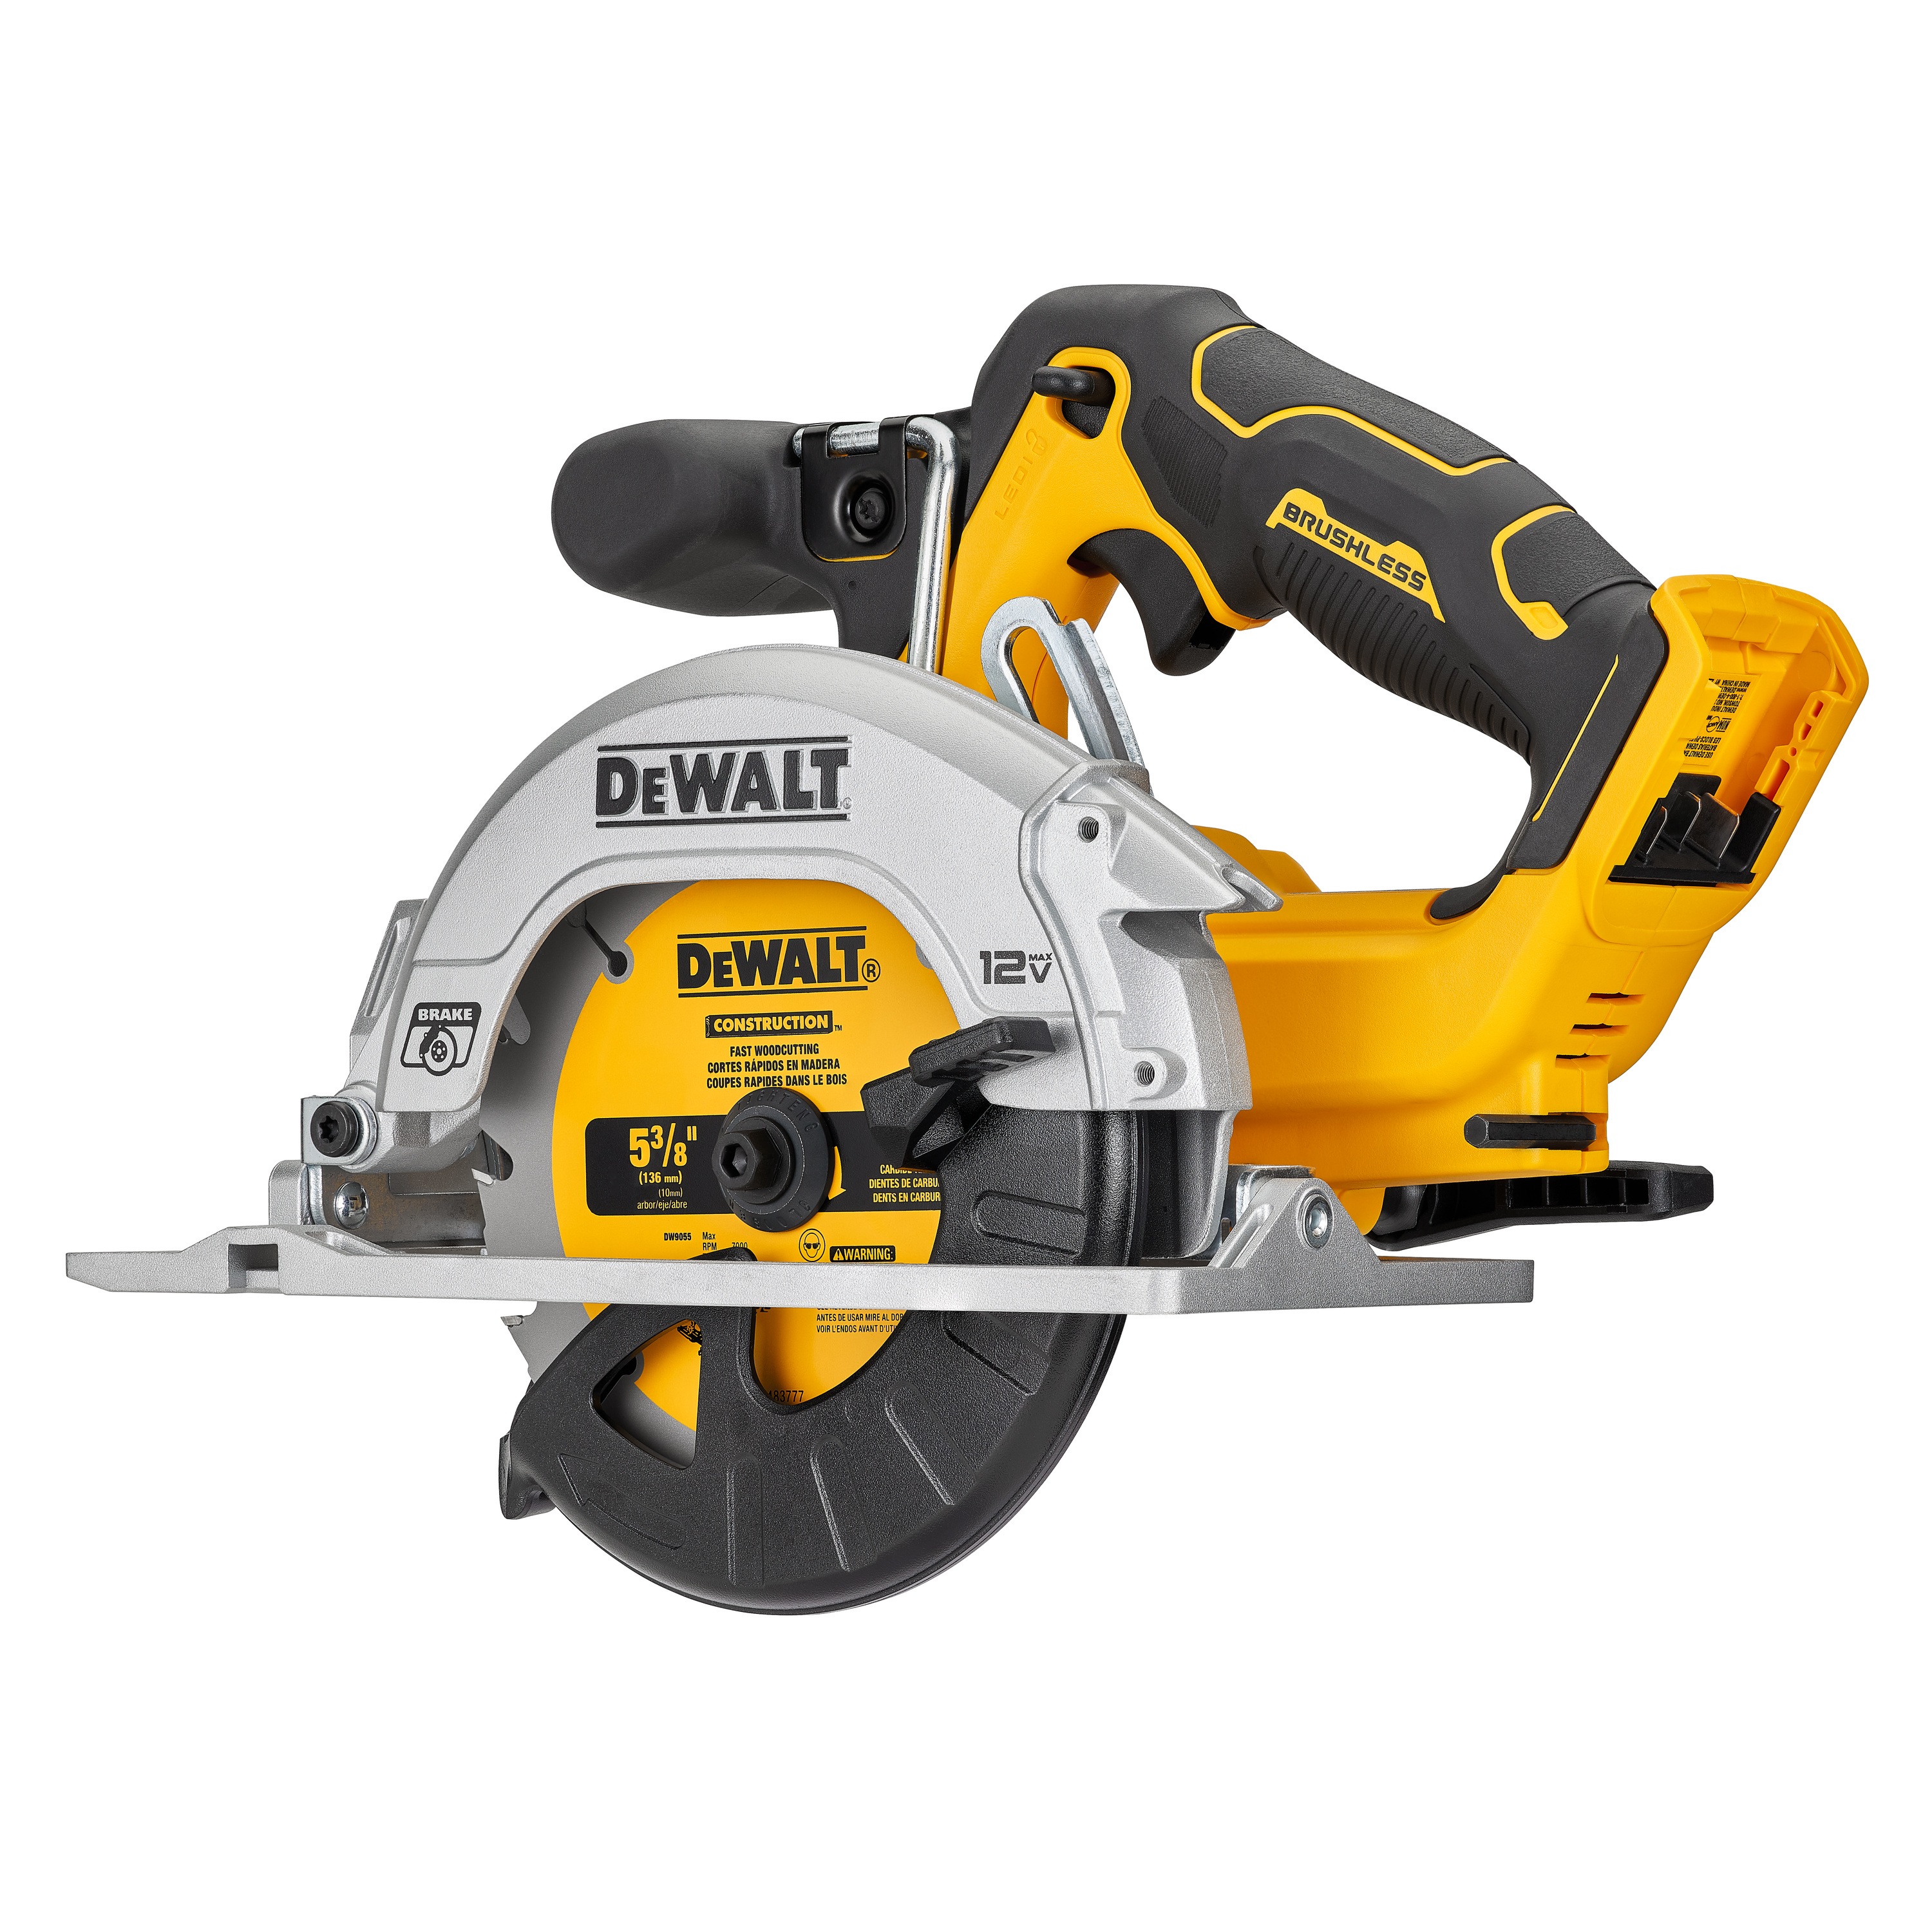 Profile of xtreme 12 volt 5 and three eighths inch brushless cordless circular saw tool.